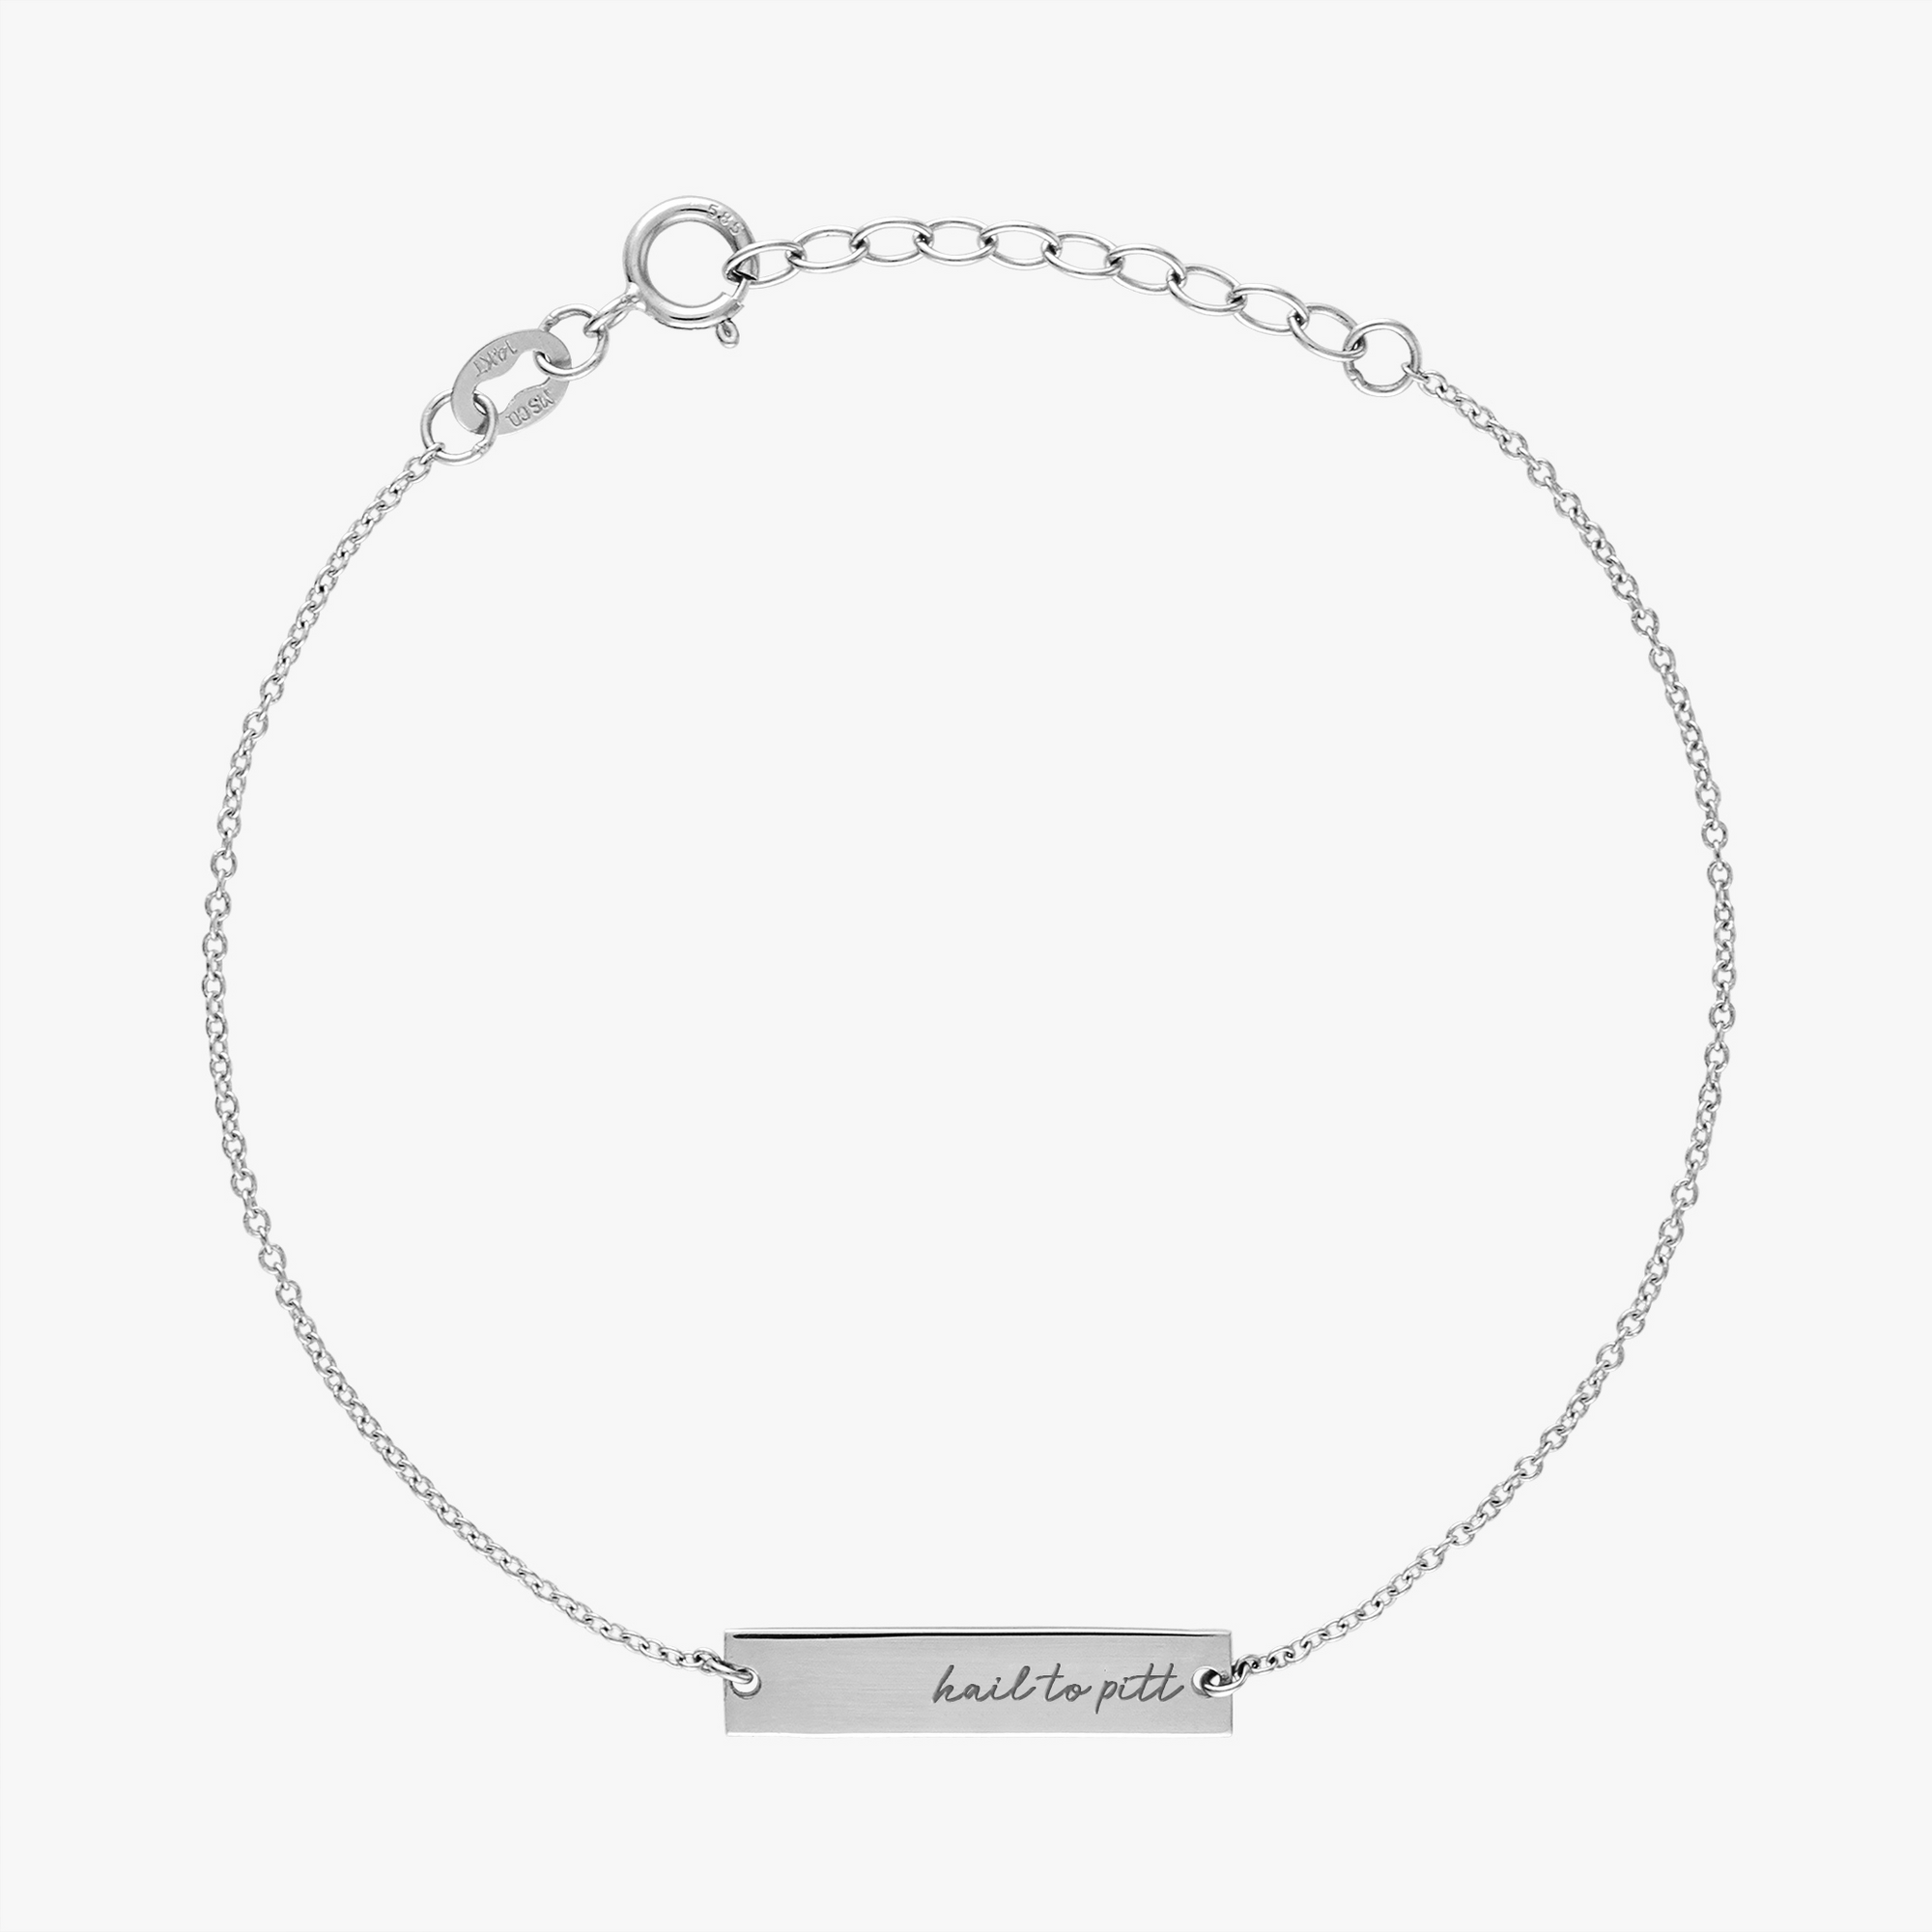 Pittsburgh University Horizontal Necklace Sterling Silver